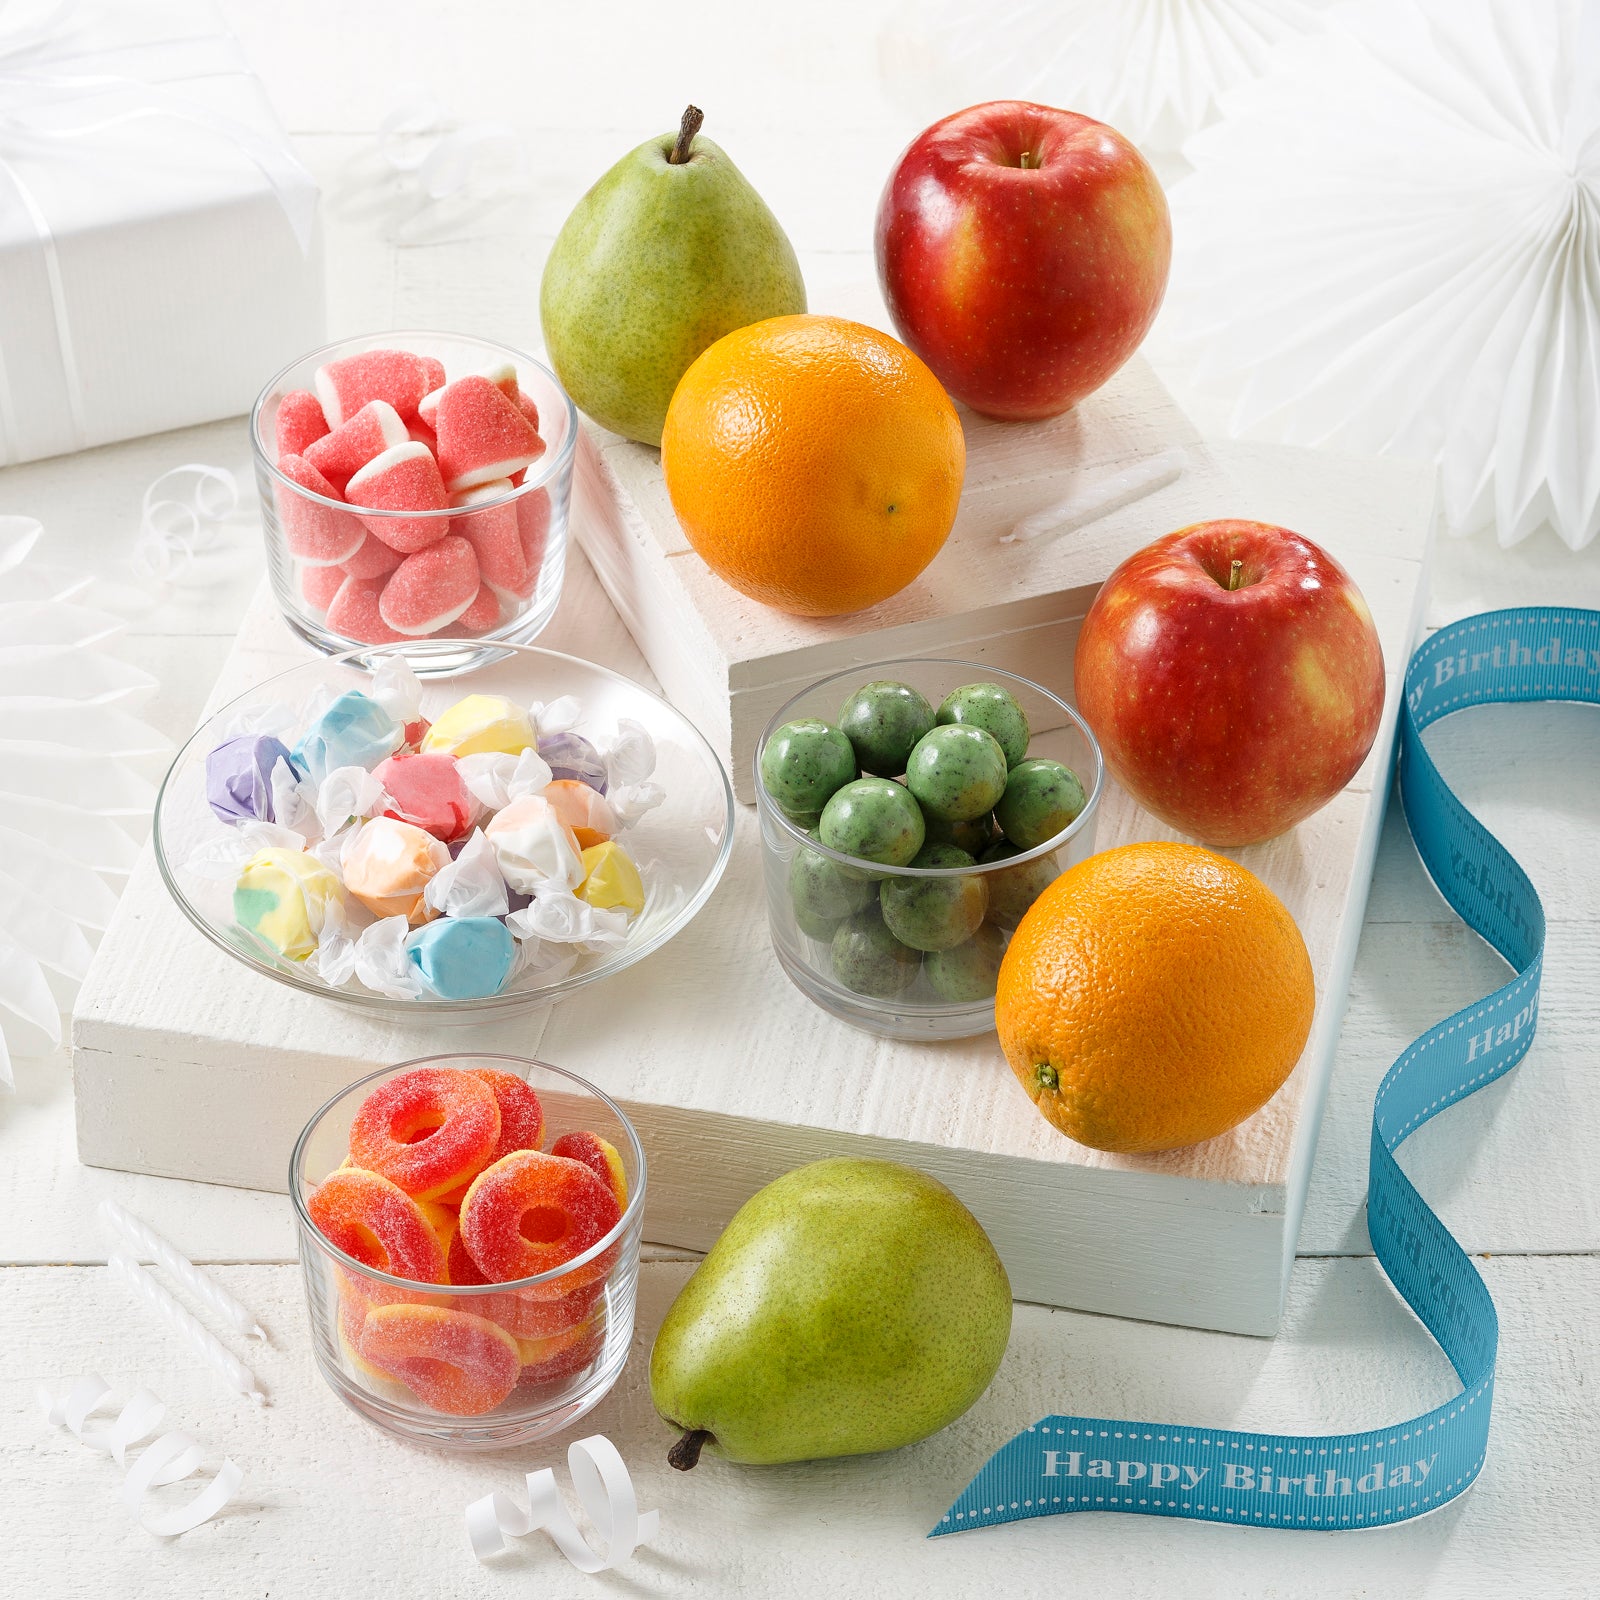 Two apples, two oranges, two pears, and an assortment of candies with a blue happy birthday  ribbon